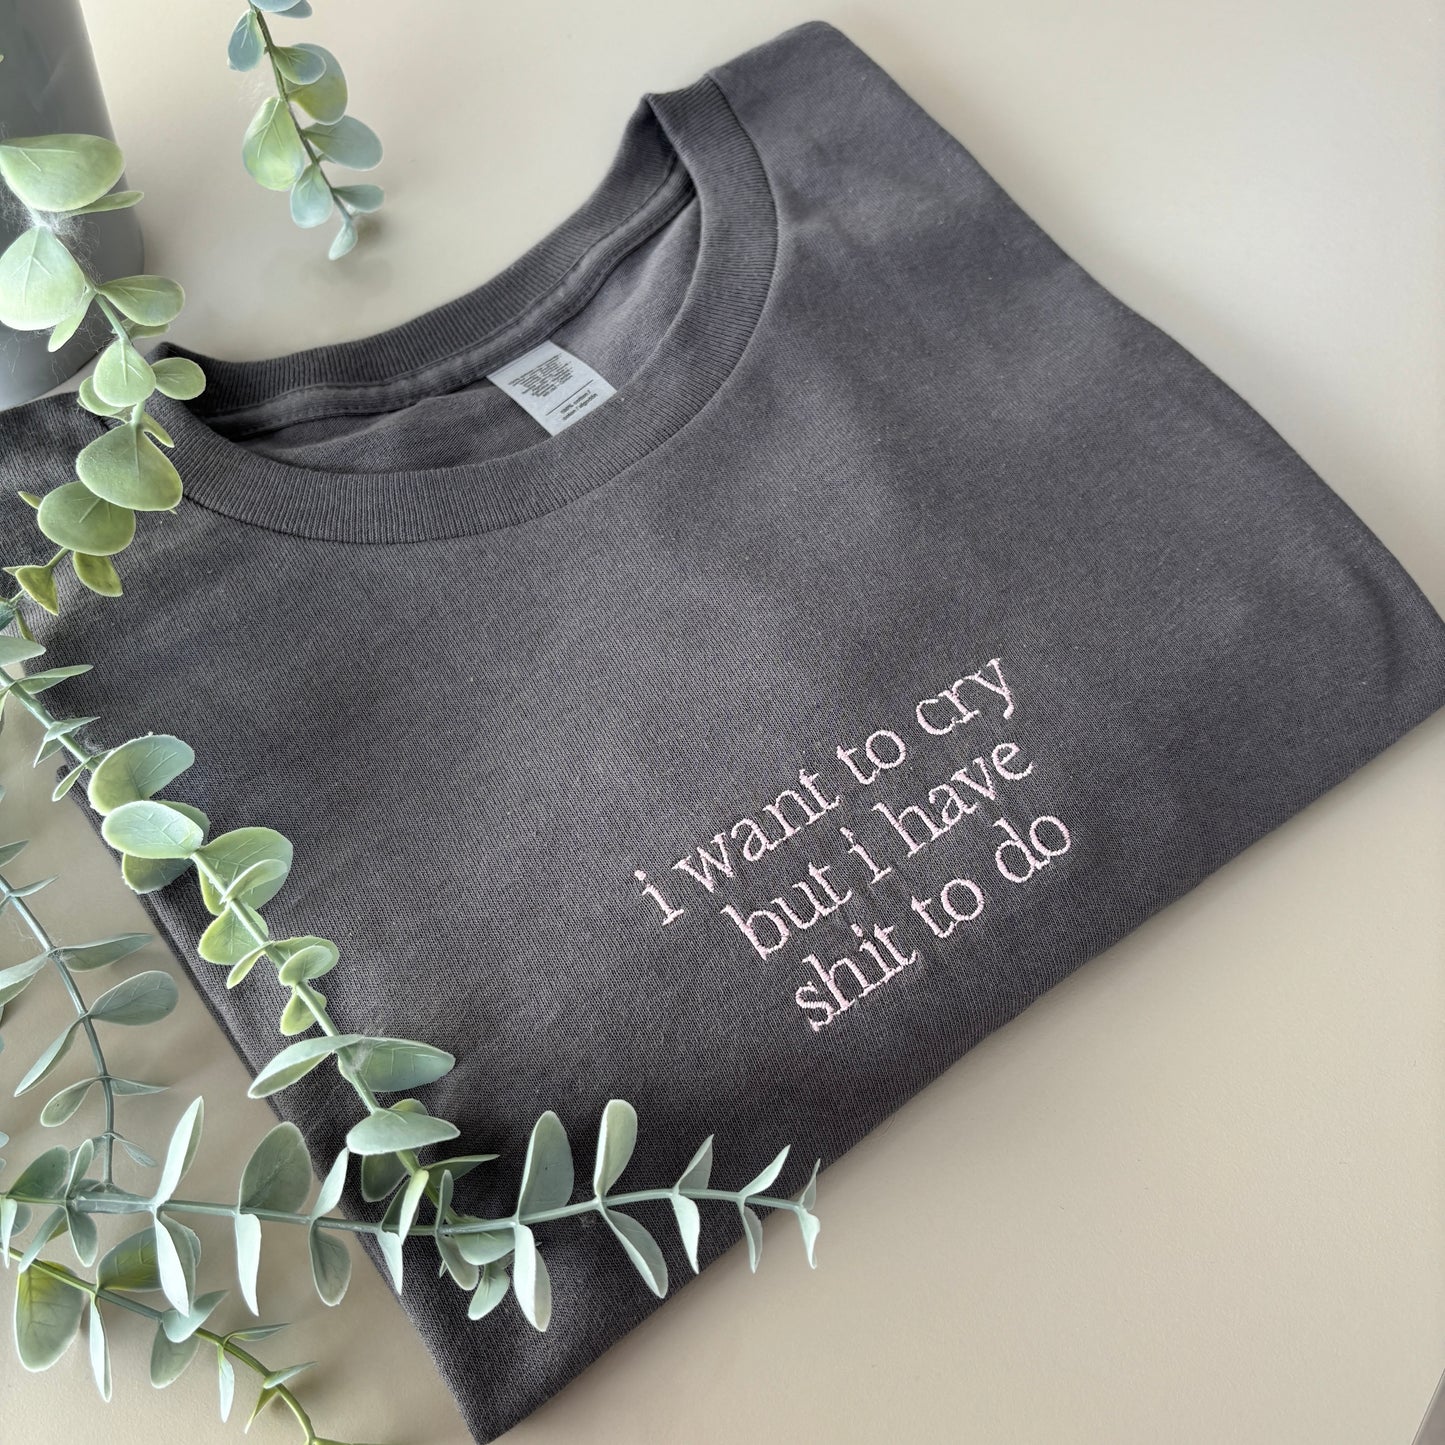 I WANT TO CRY EMBROIDERED T-SHIRT